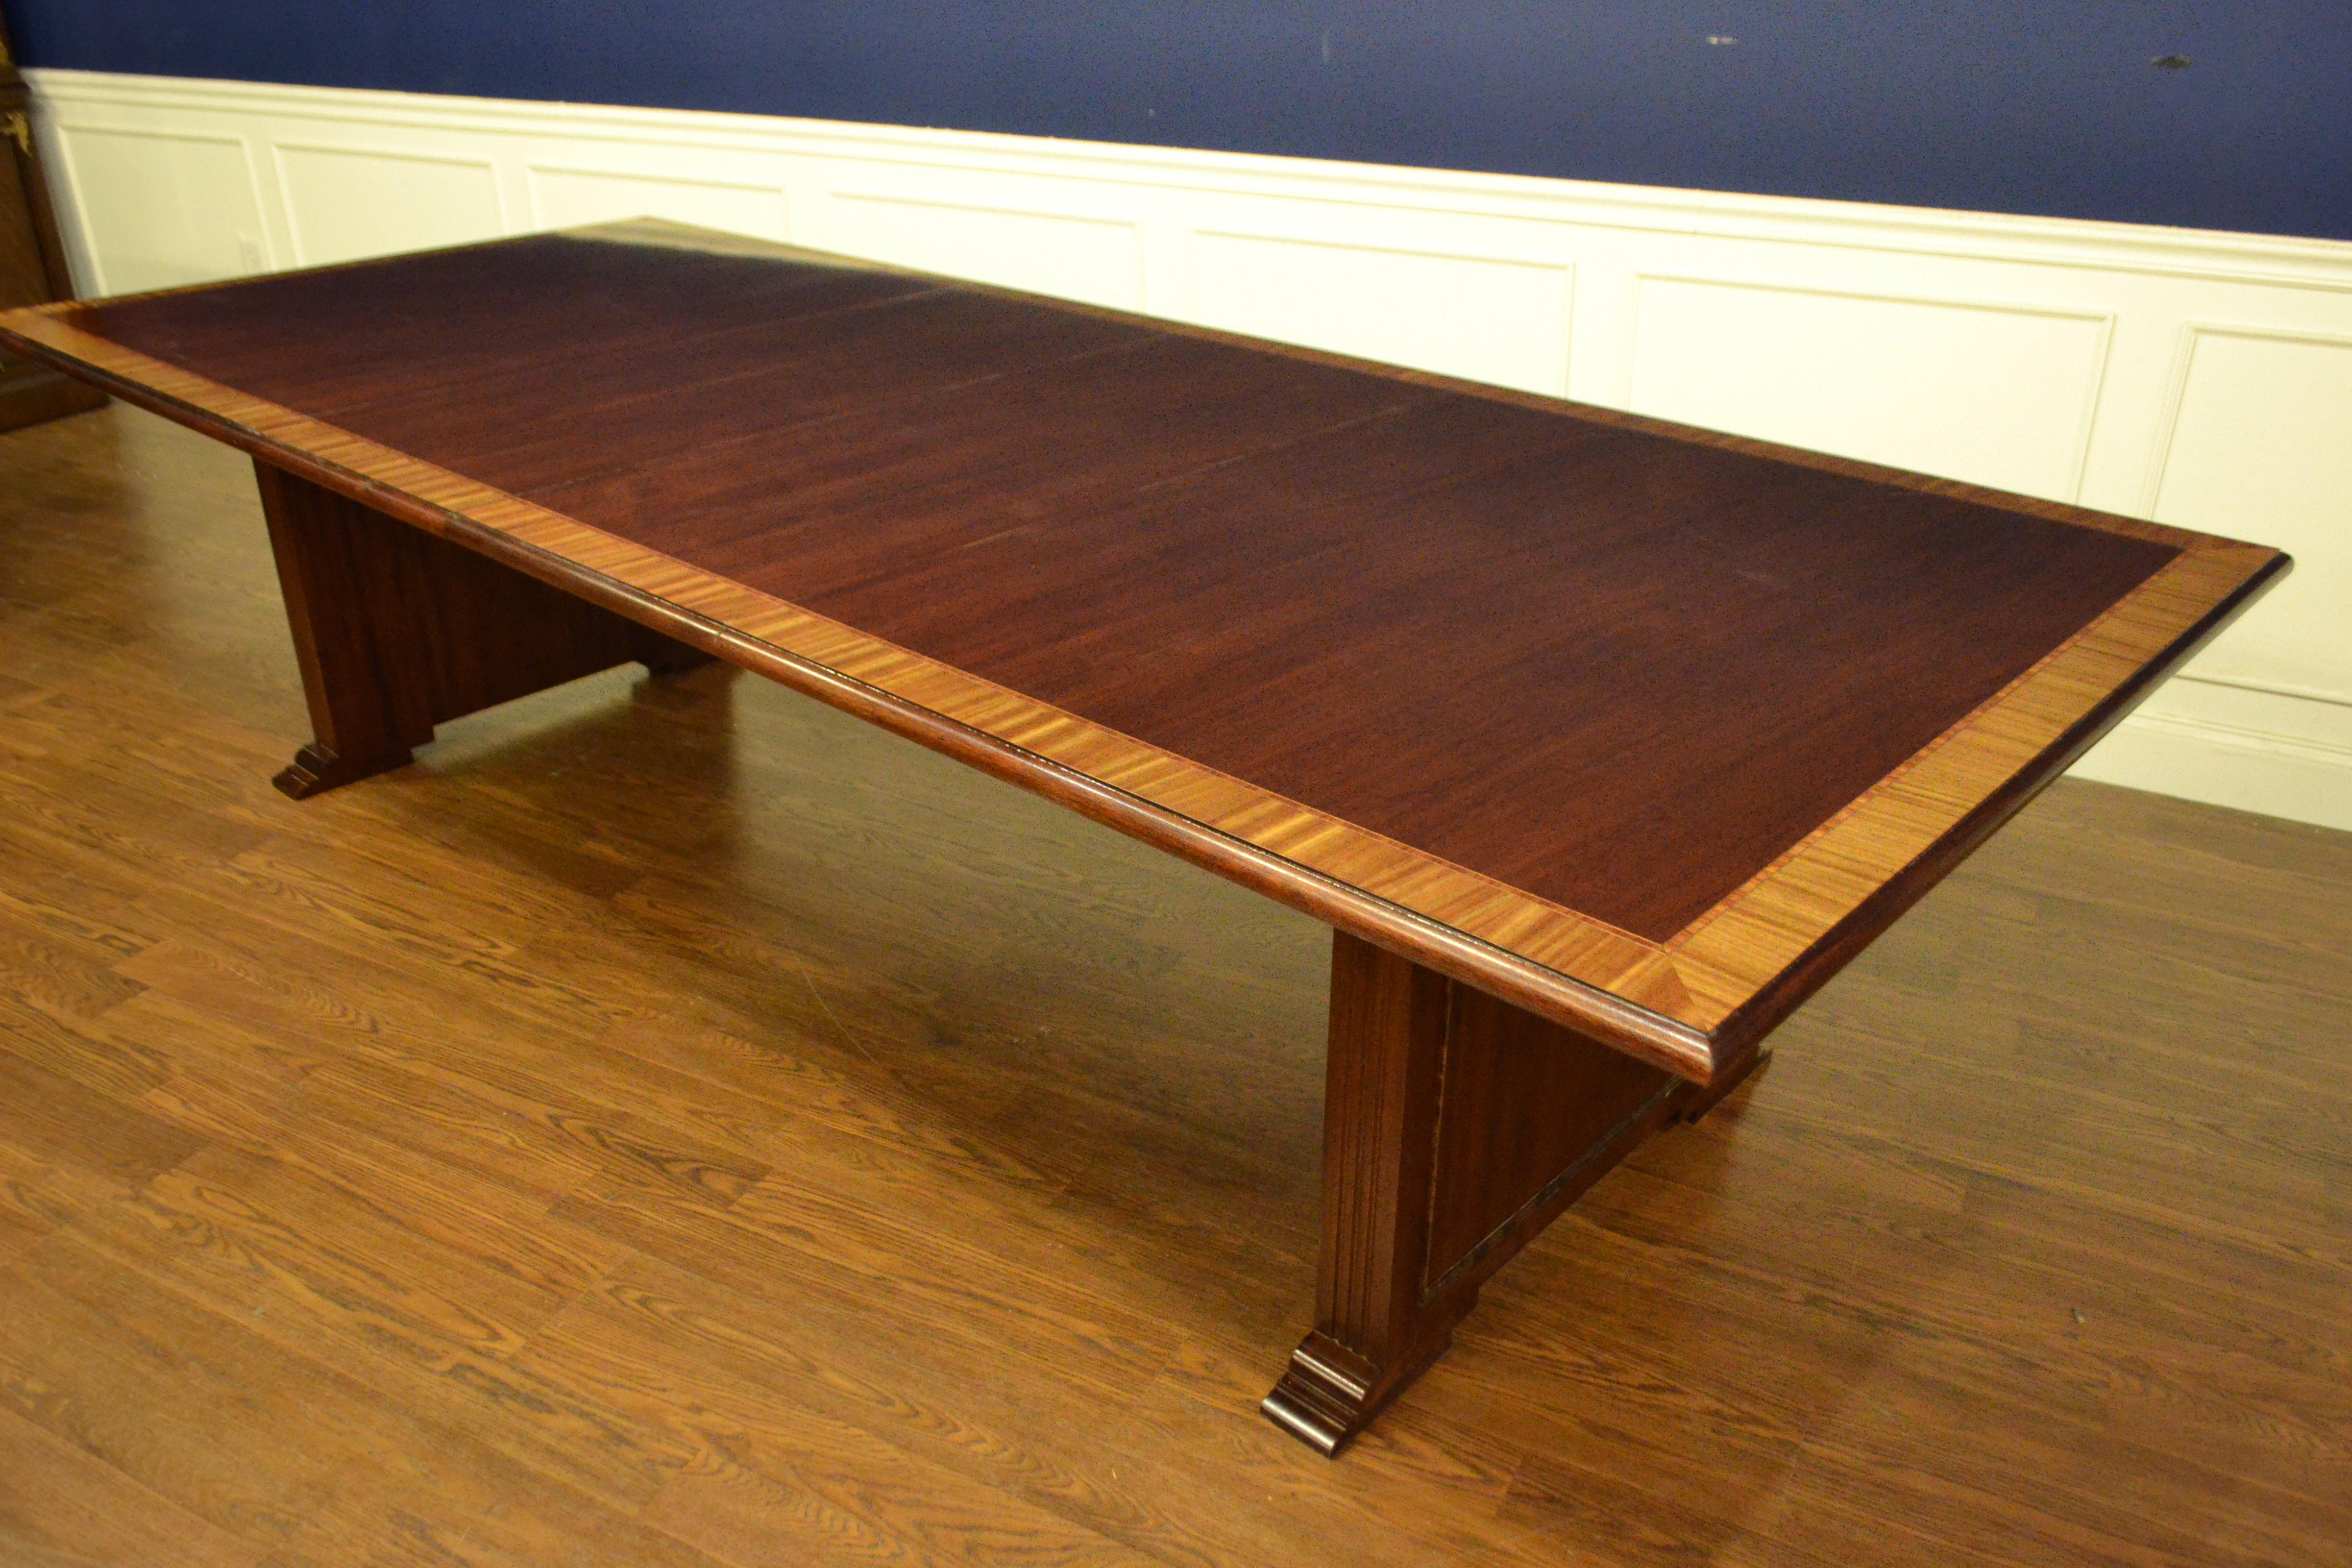 This is a made-to-order mahogany conference table made in the Leighton Hall shop. It features a field of ribbon mahogany and a satinwood border. It has two 